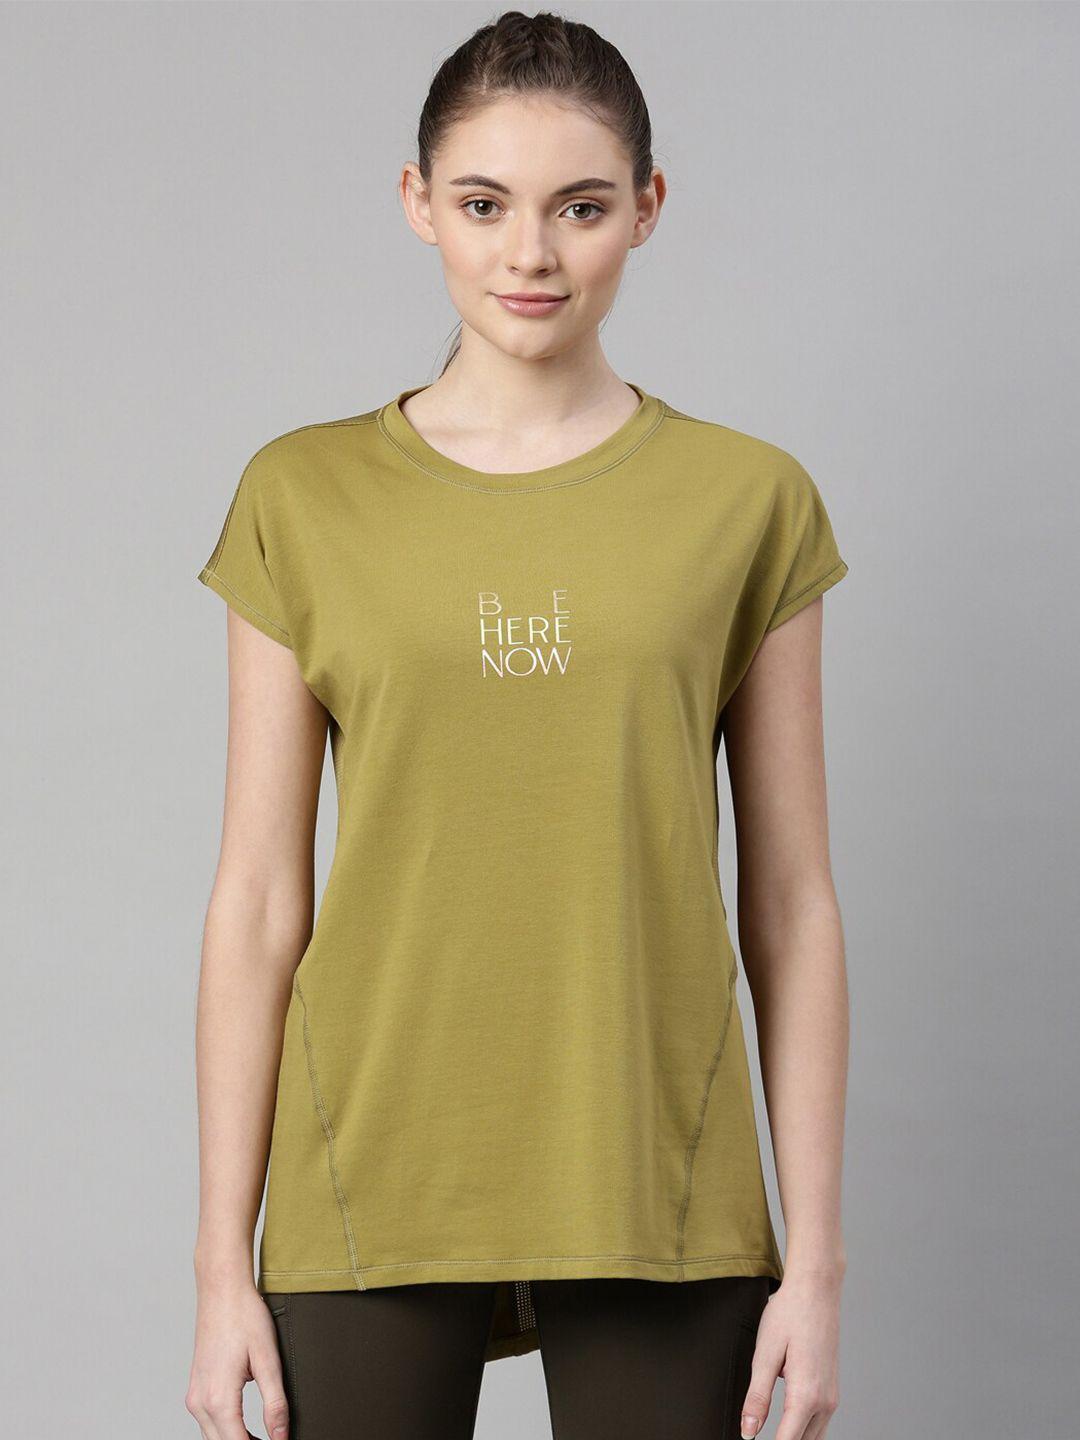 enamor-women-olive-green-extended-sleeves-antimicrobial-t-shirt